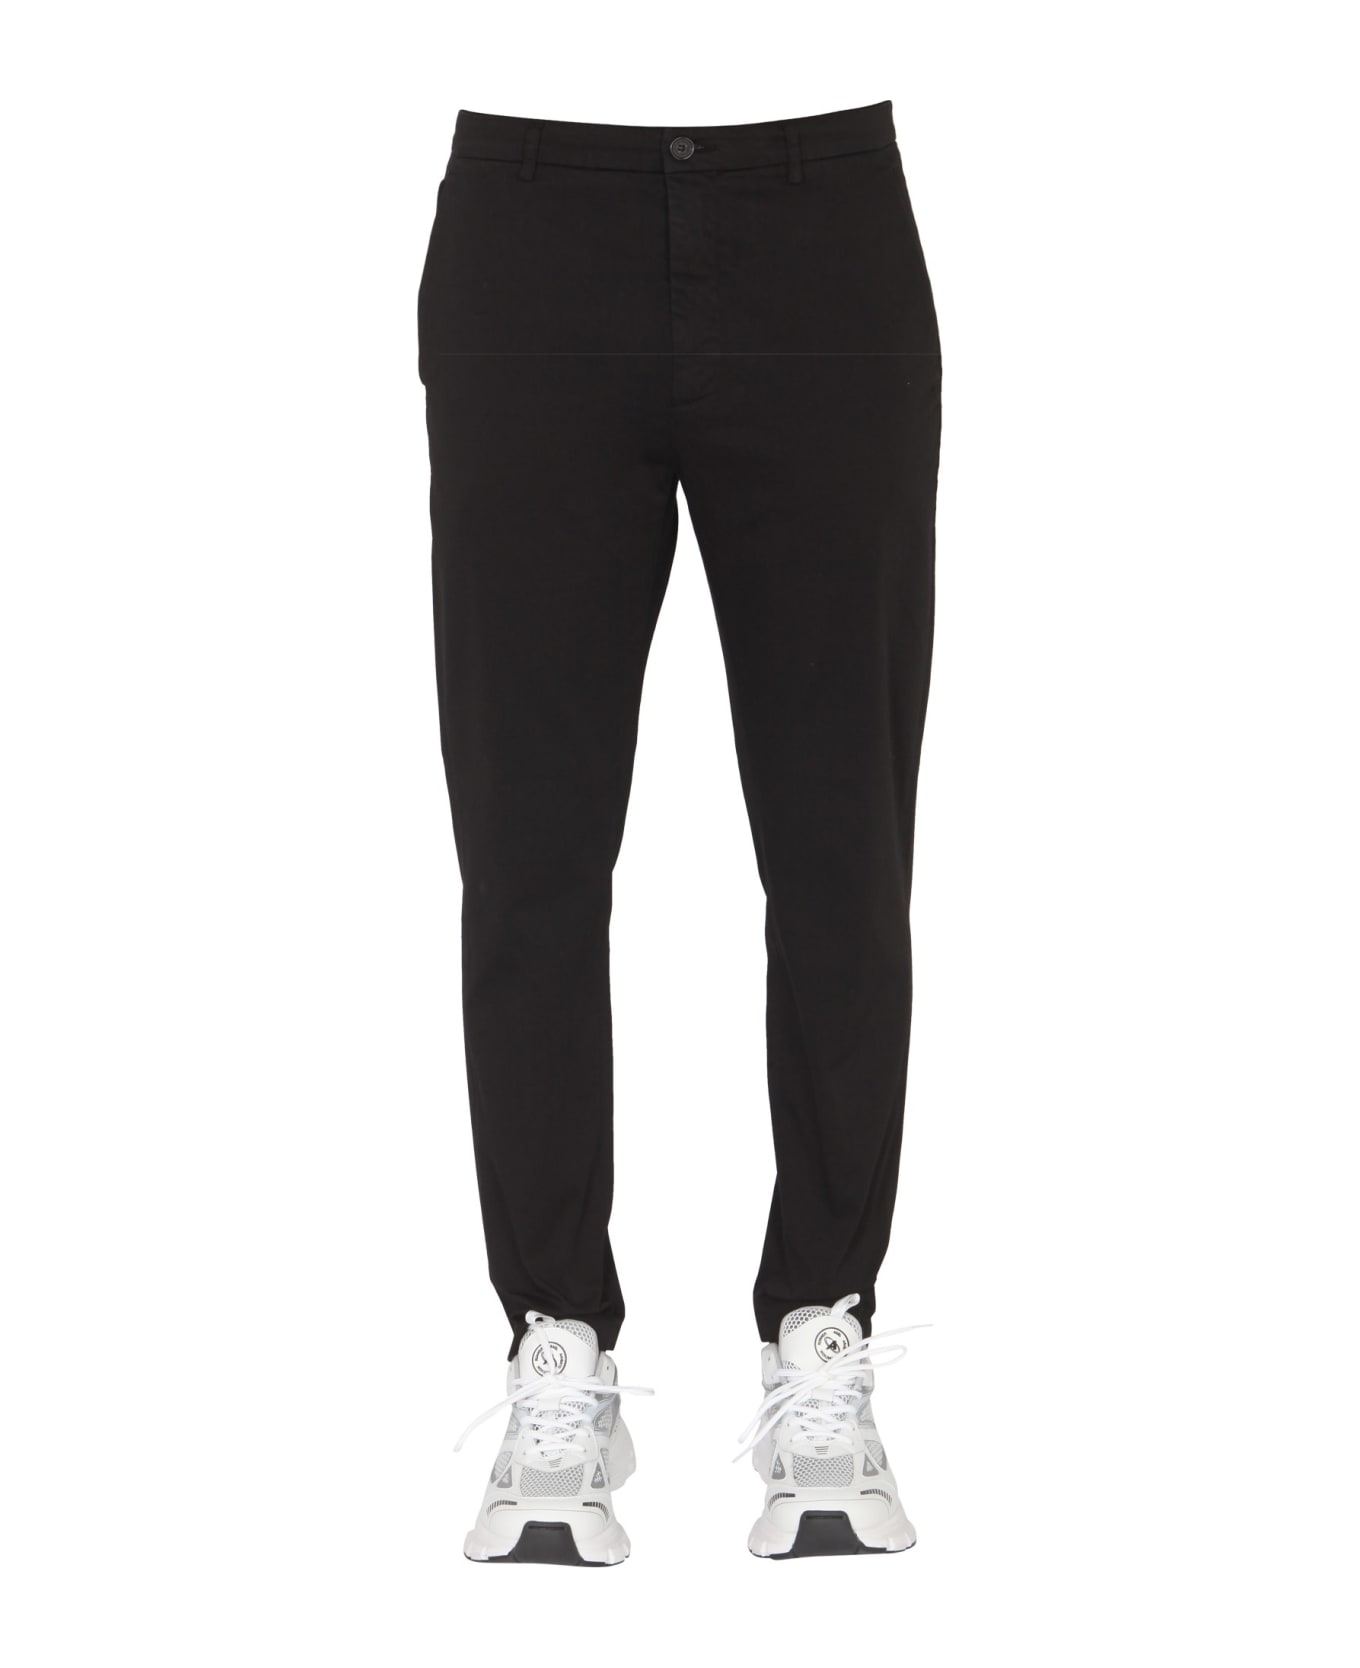 Department Five Prince Trousers - NERO